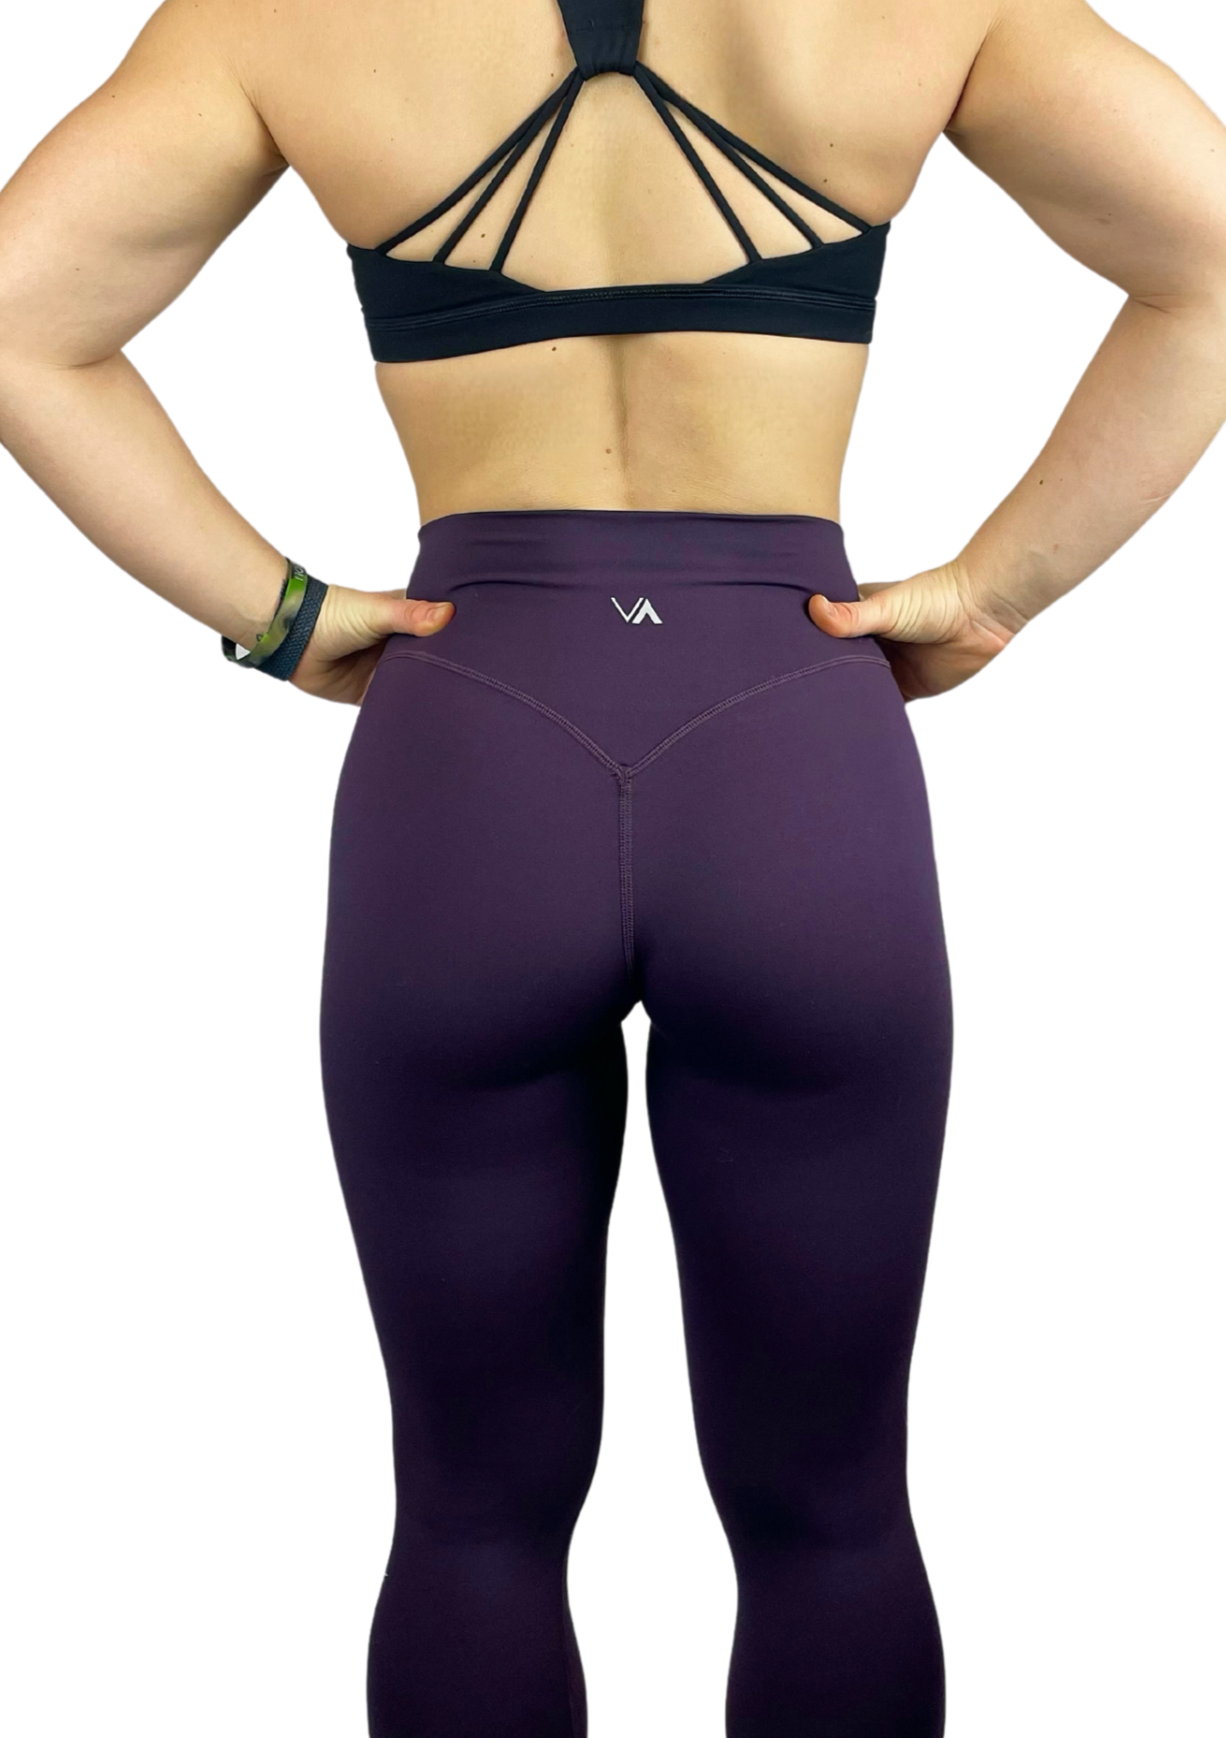 Everest Legging- Buttery Soft Compression for Shape and Comfort